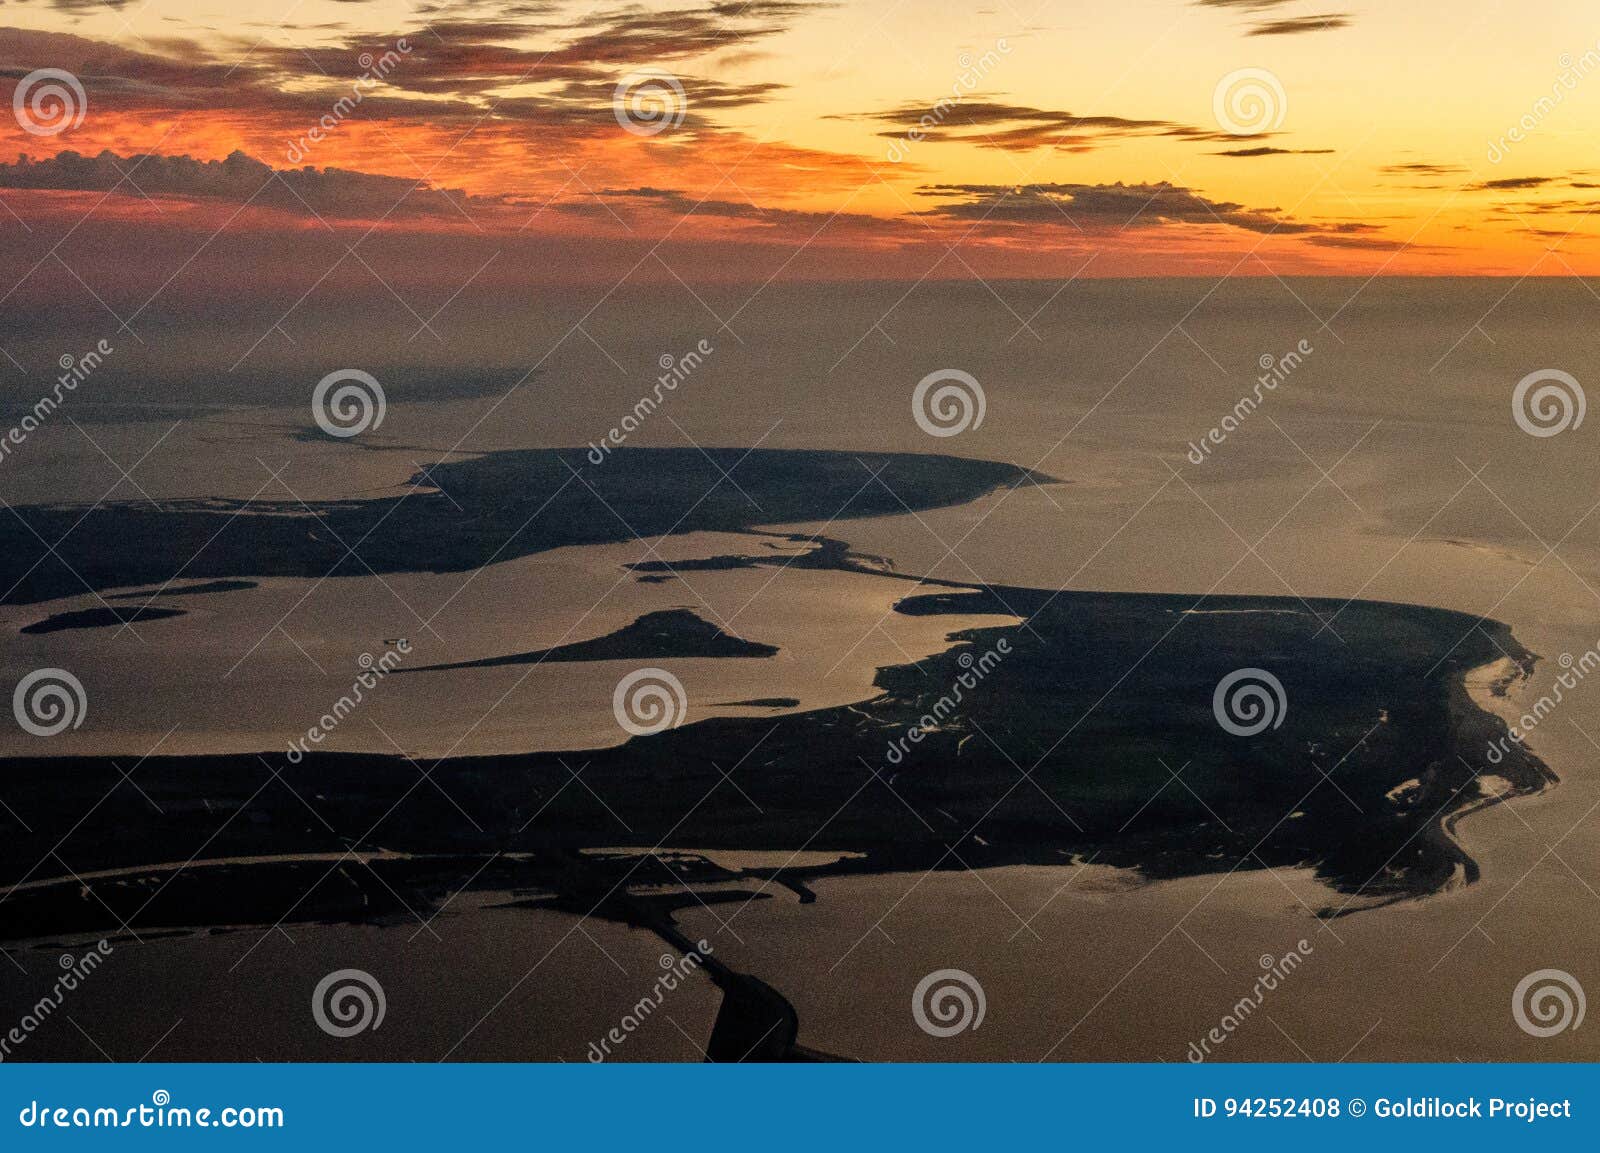 Zeeland at Sunset. Impression of the Dutch province of Zeeland, from the air, after sunset.